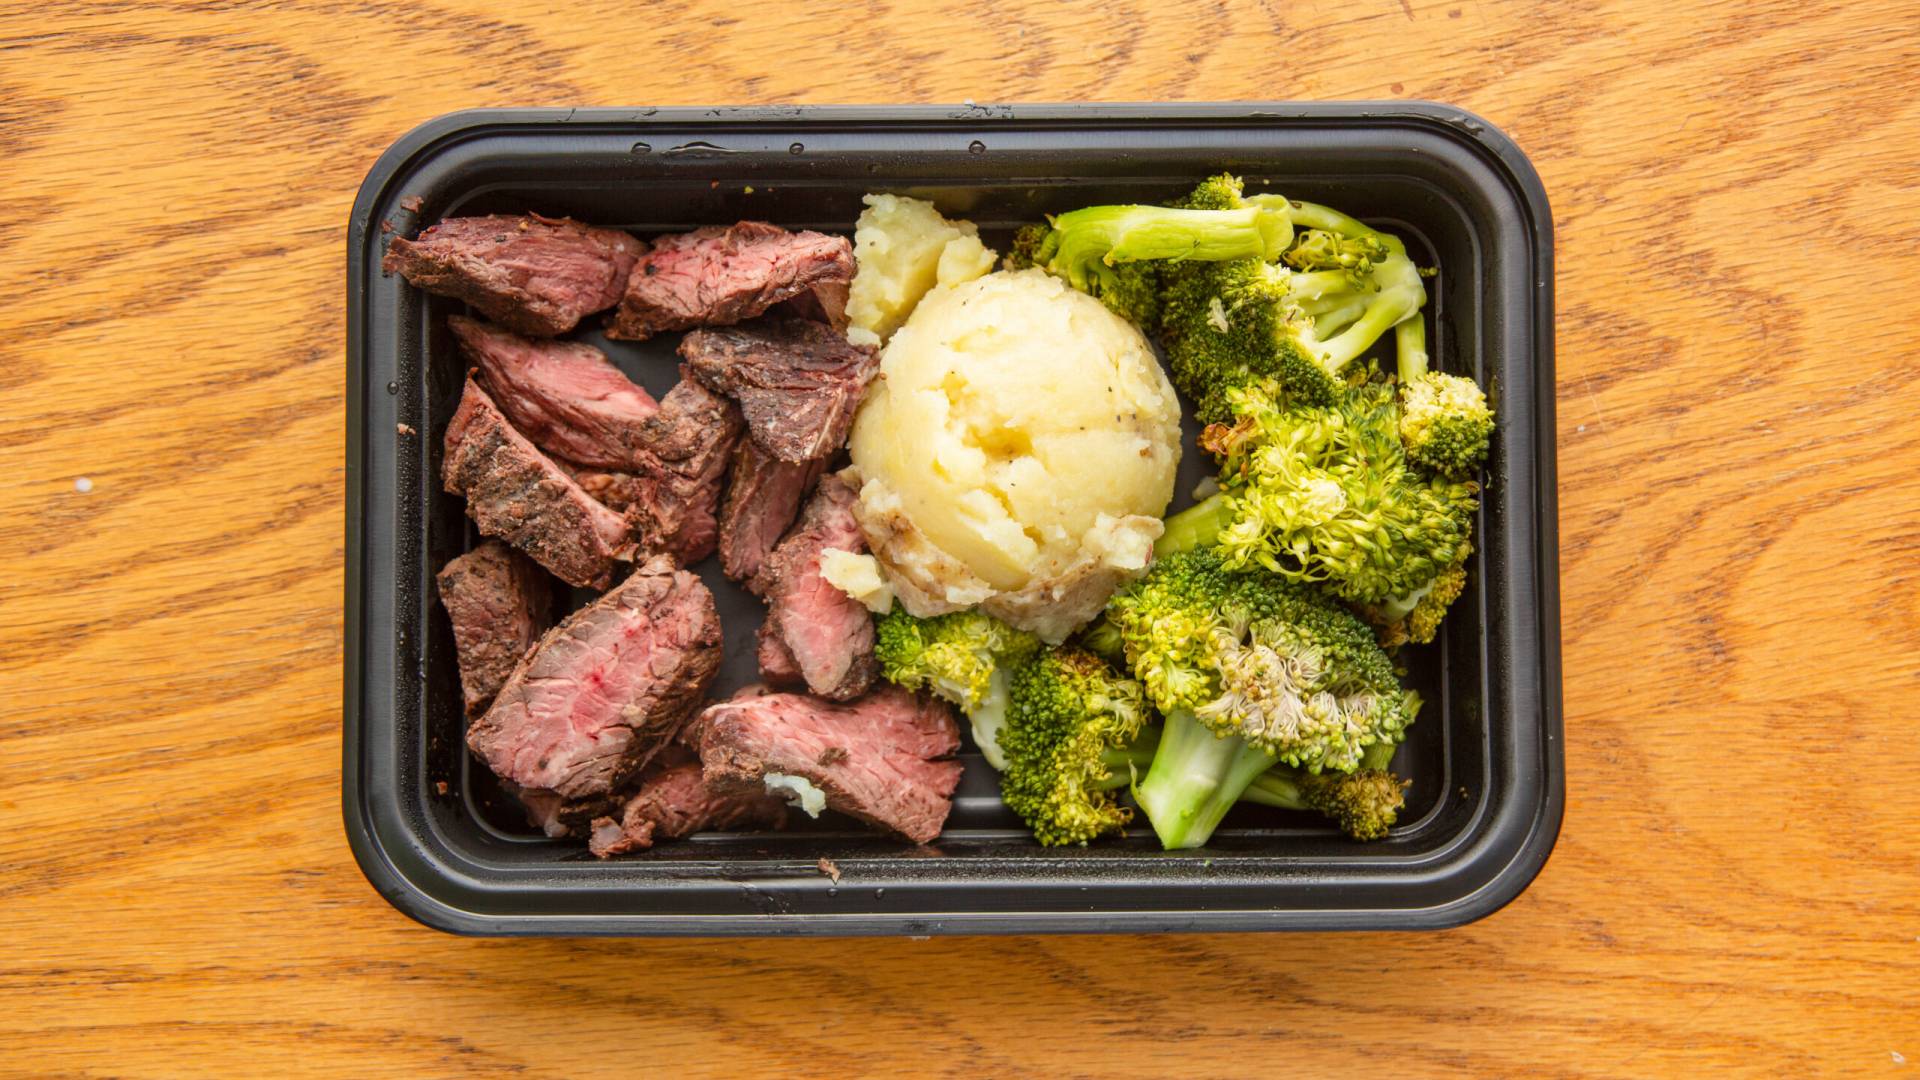 Steak with Mashed Potatoes and Broccoli